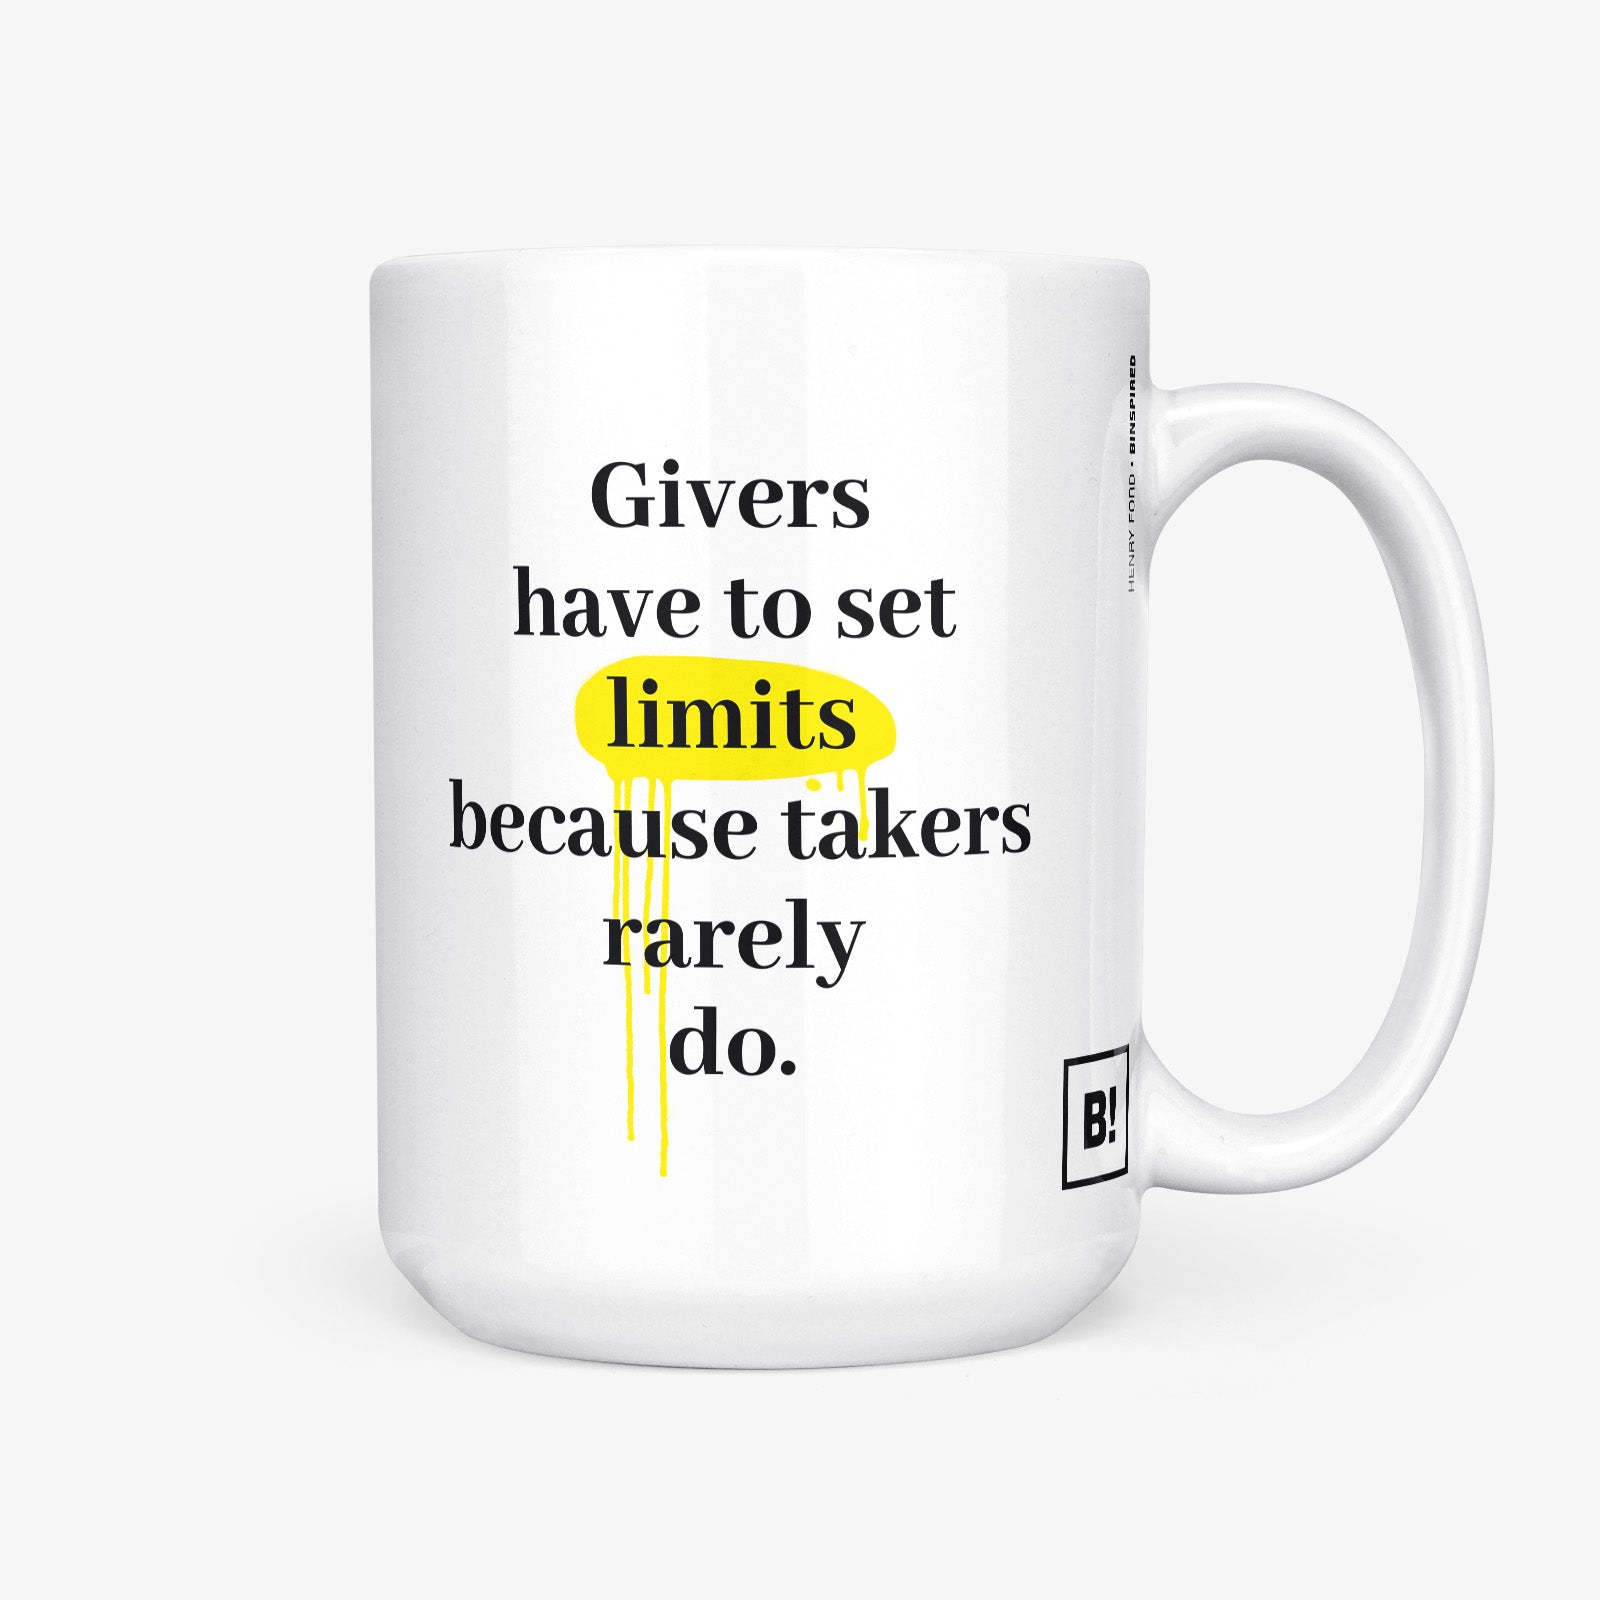 Be inspired by Henry Ford's famous quote, "Givers have to set limits because takers rarely do" on this white and glossy 15oz coffee mug with the handle on the right.